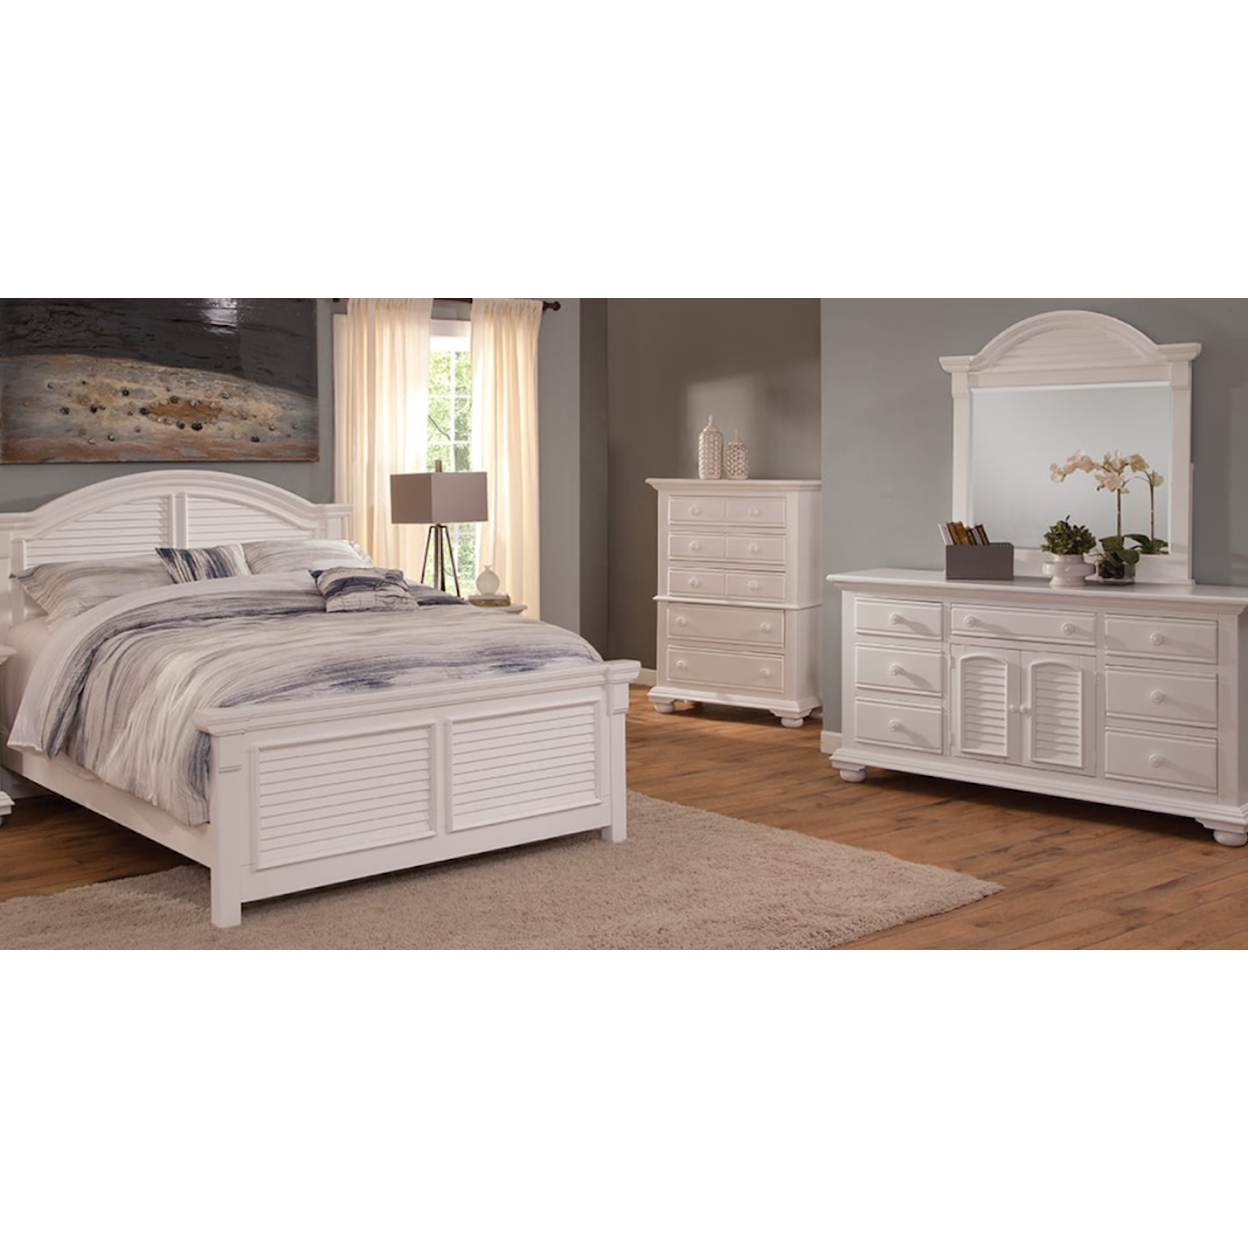 American Woodcrafters Cottage Traditions Queen Bedroom Set